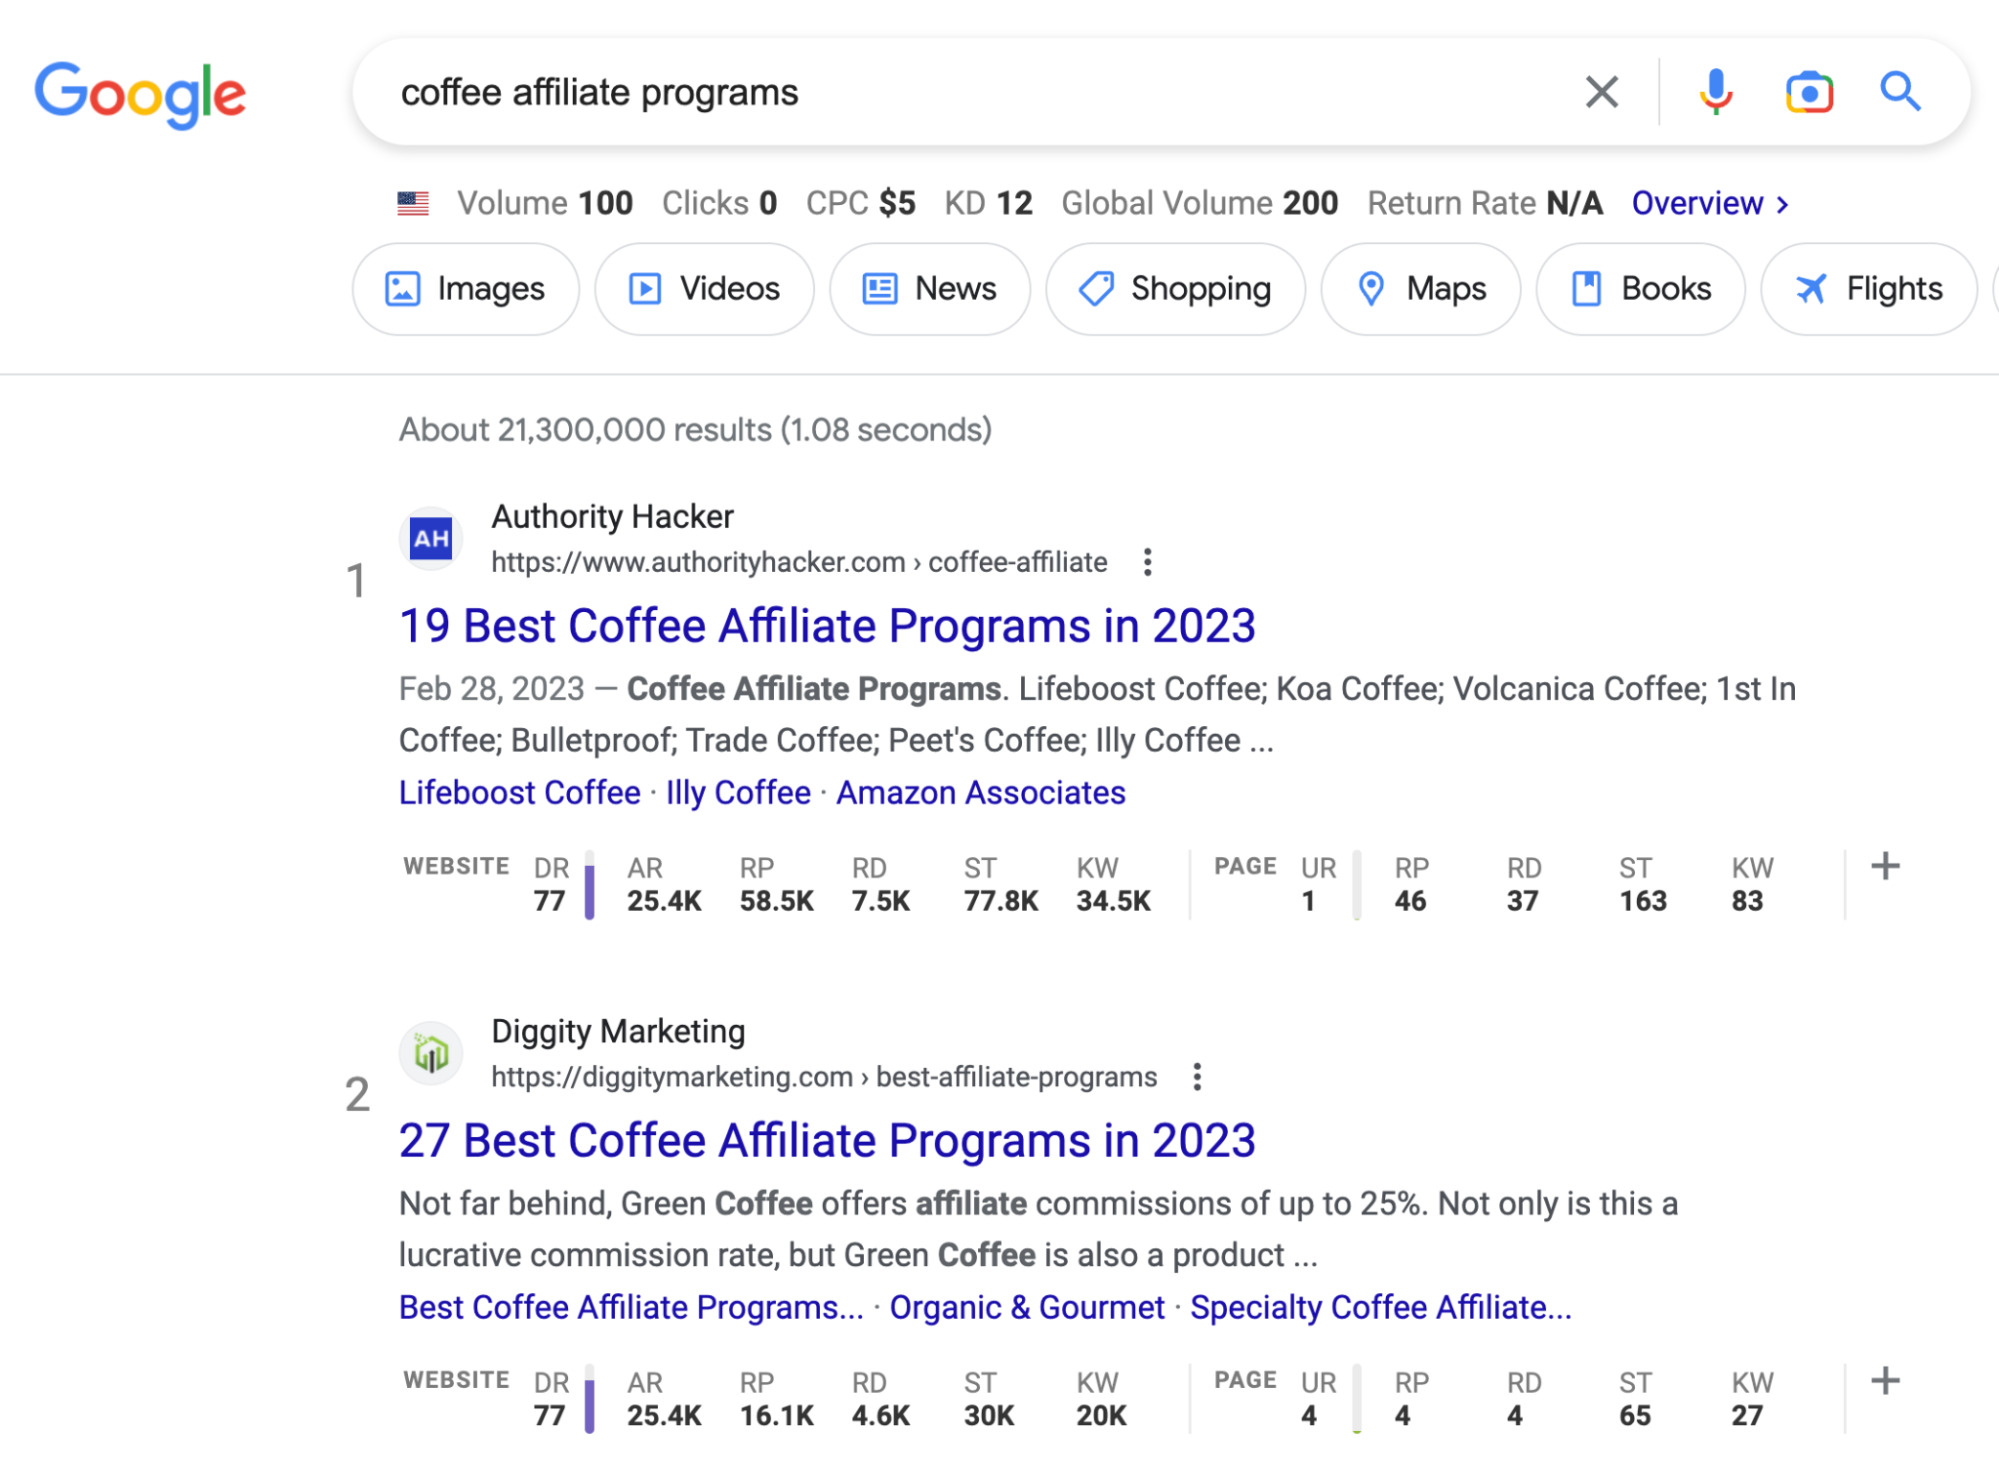 Google search results for "coffee affiliate programs"